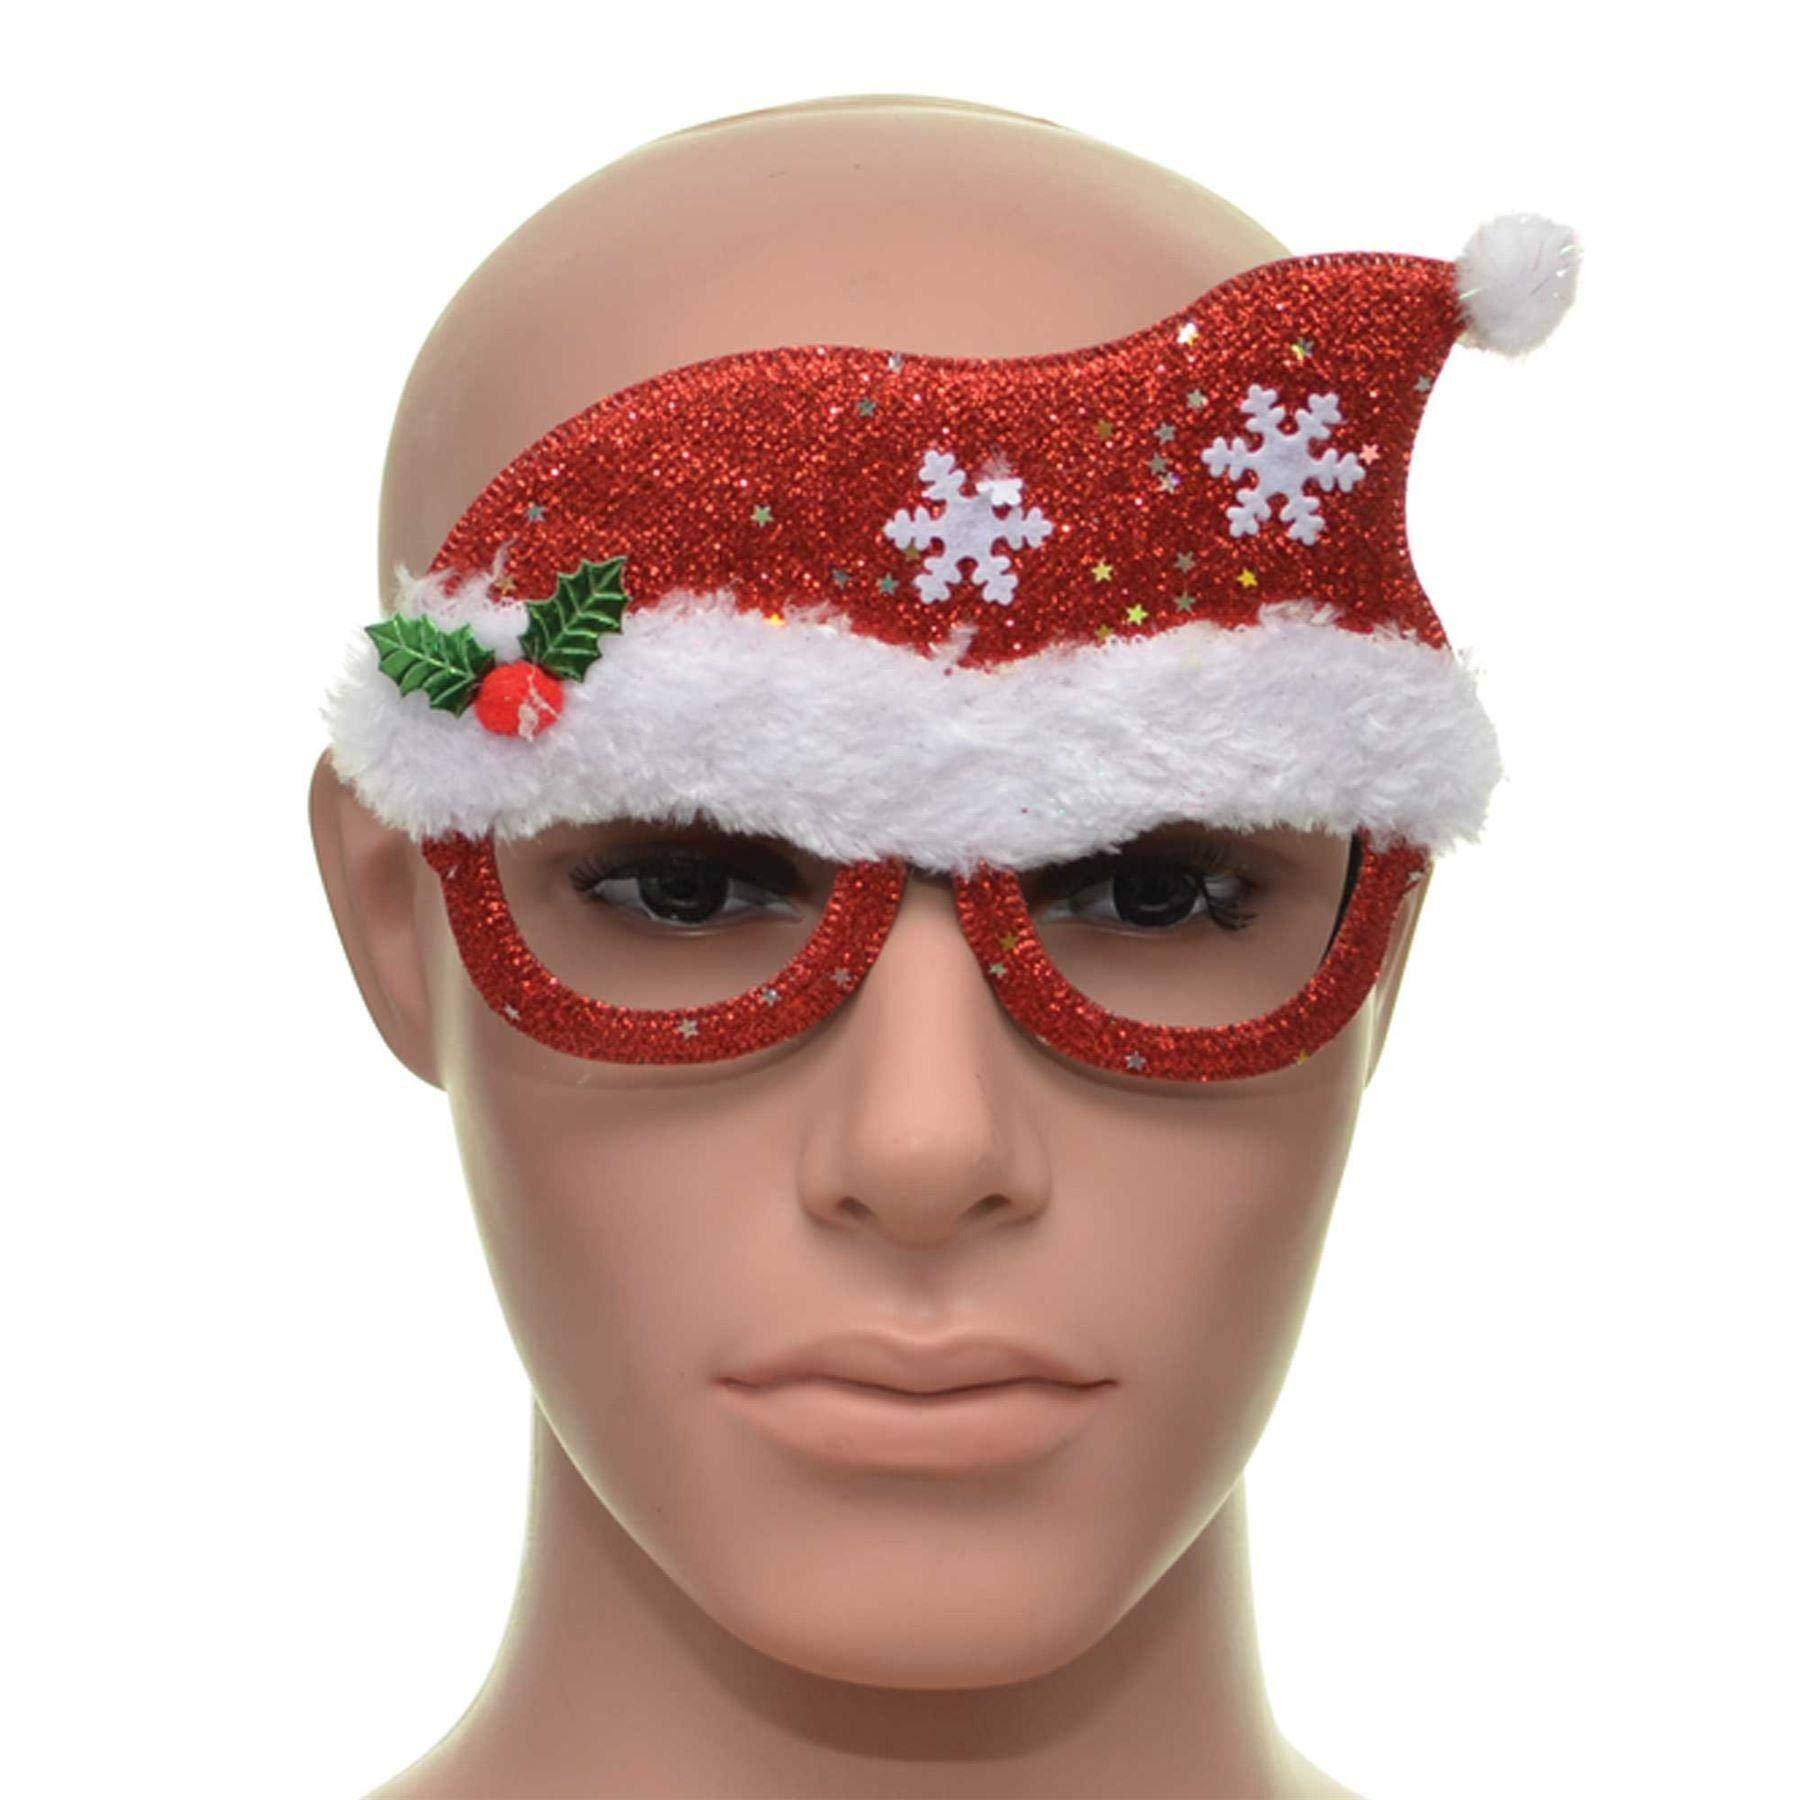 Novelty Glitter Red Santa Hat Christmas Glasses Christmas Party Props Photo Booth Accessories Stocking Fillers - image 1